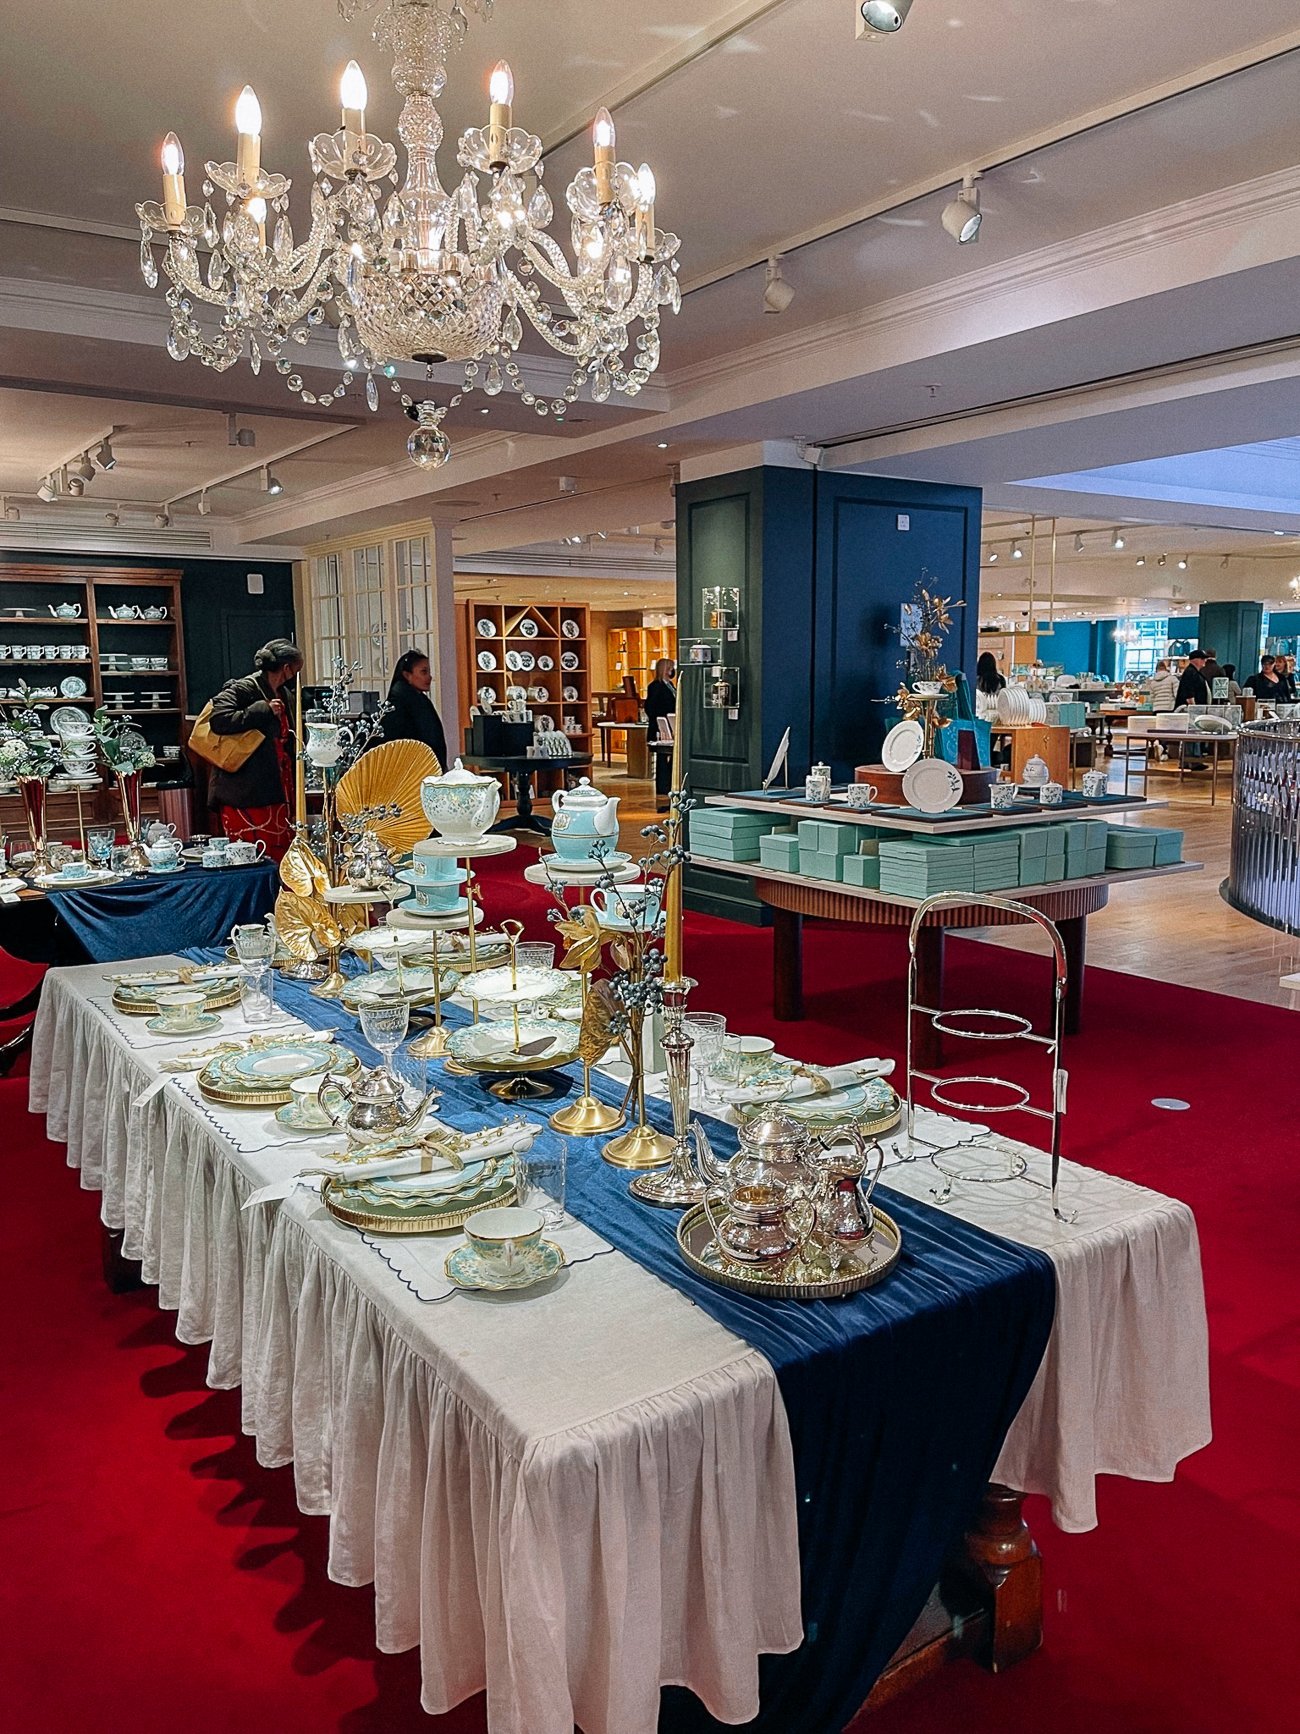 Fortnum & Mason silver set and tea set on a display table with crystal chandelier overhead